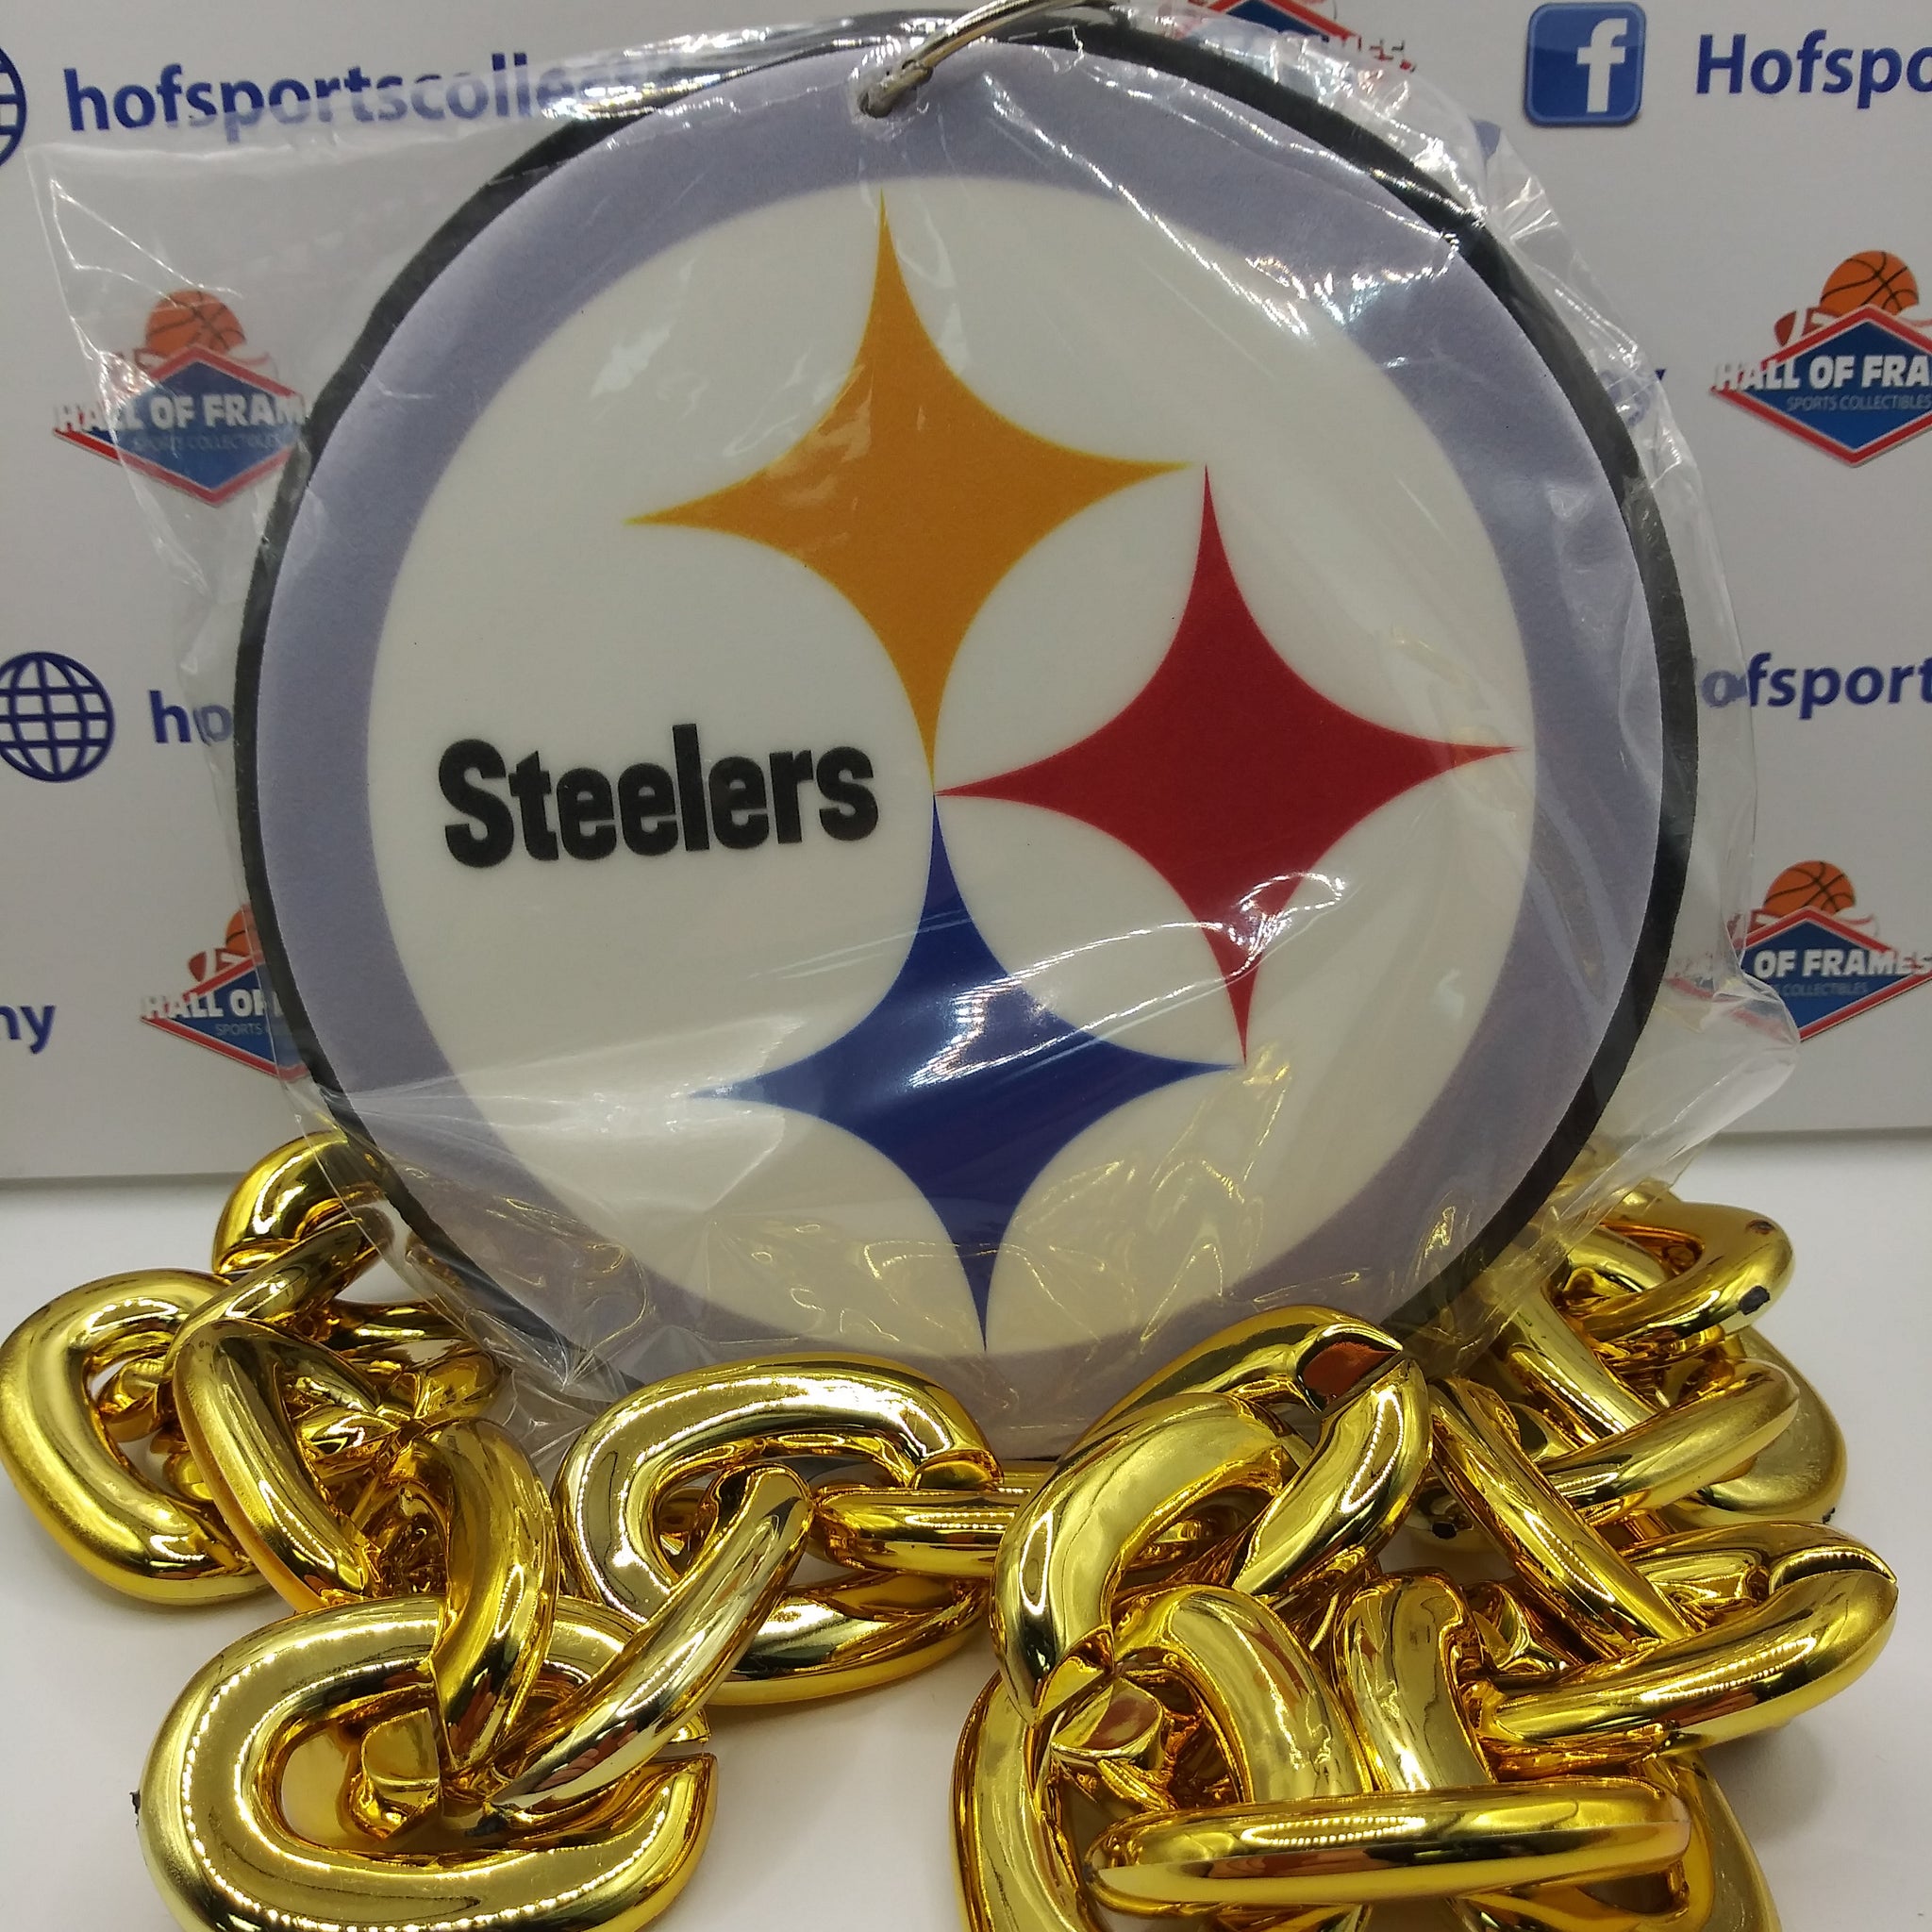 PITTSBURGH STEELERS FANCHAIN BY FANFAVE!